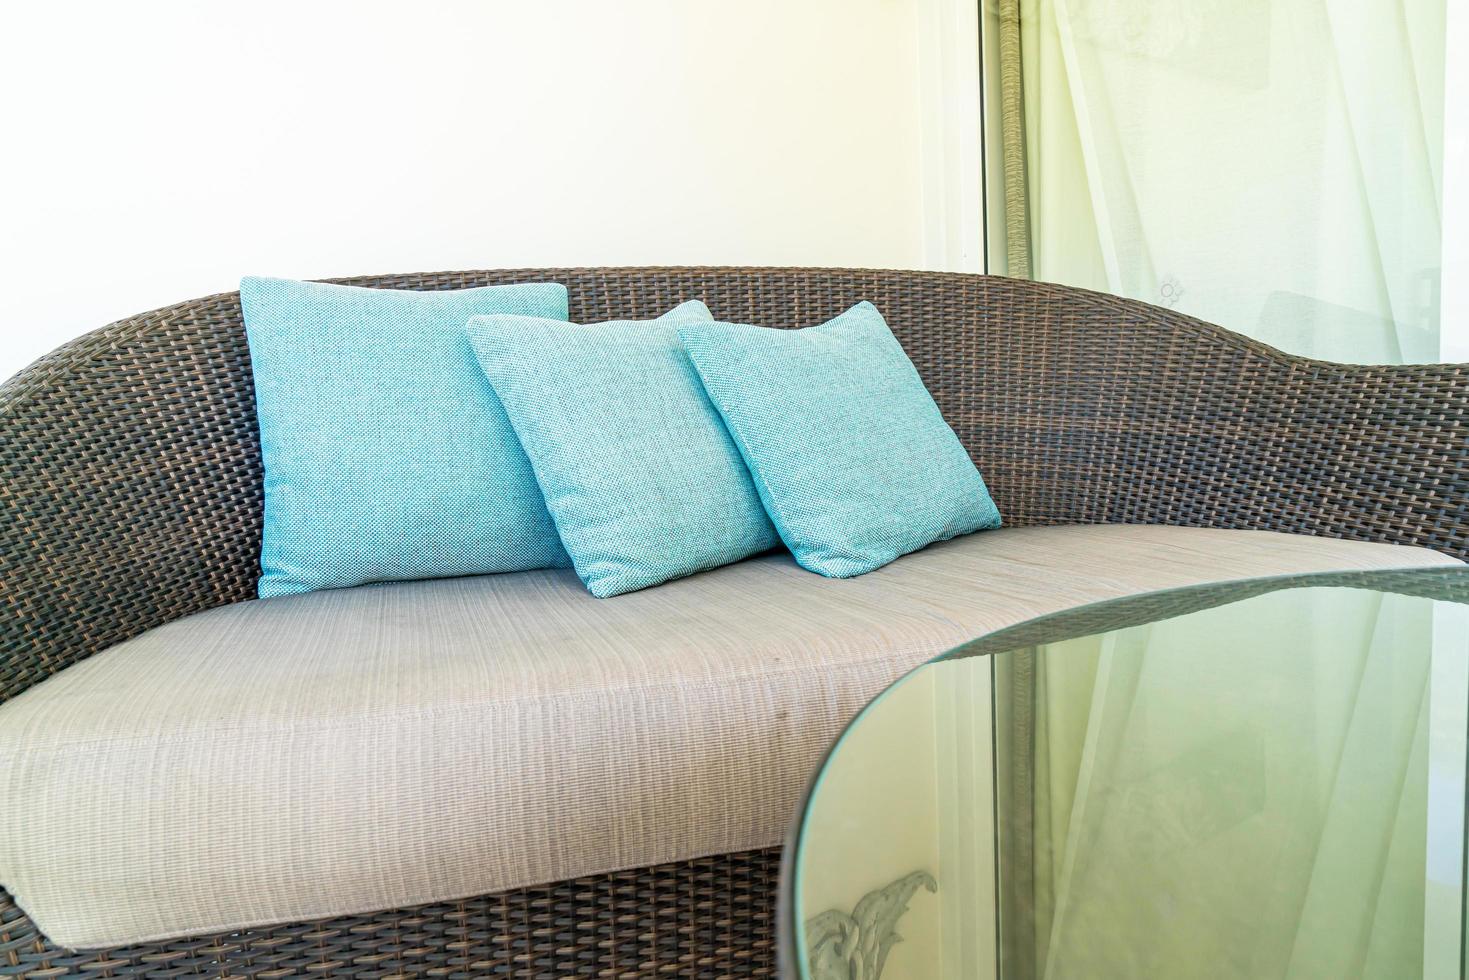 Comfortable pillow decoration on patio chair on balcony photo